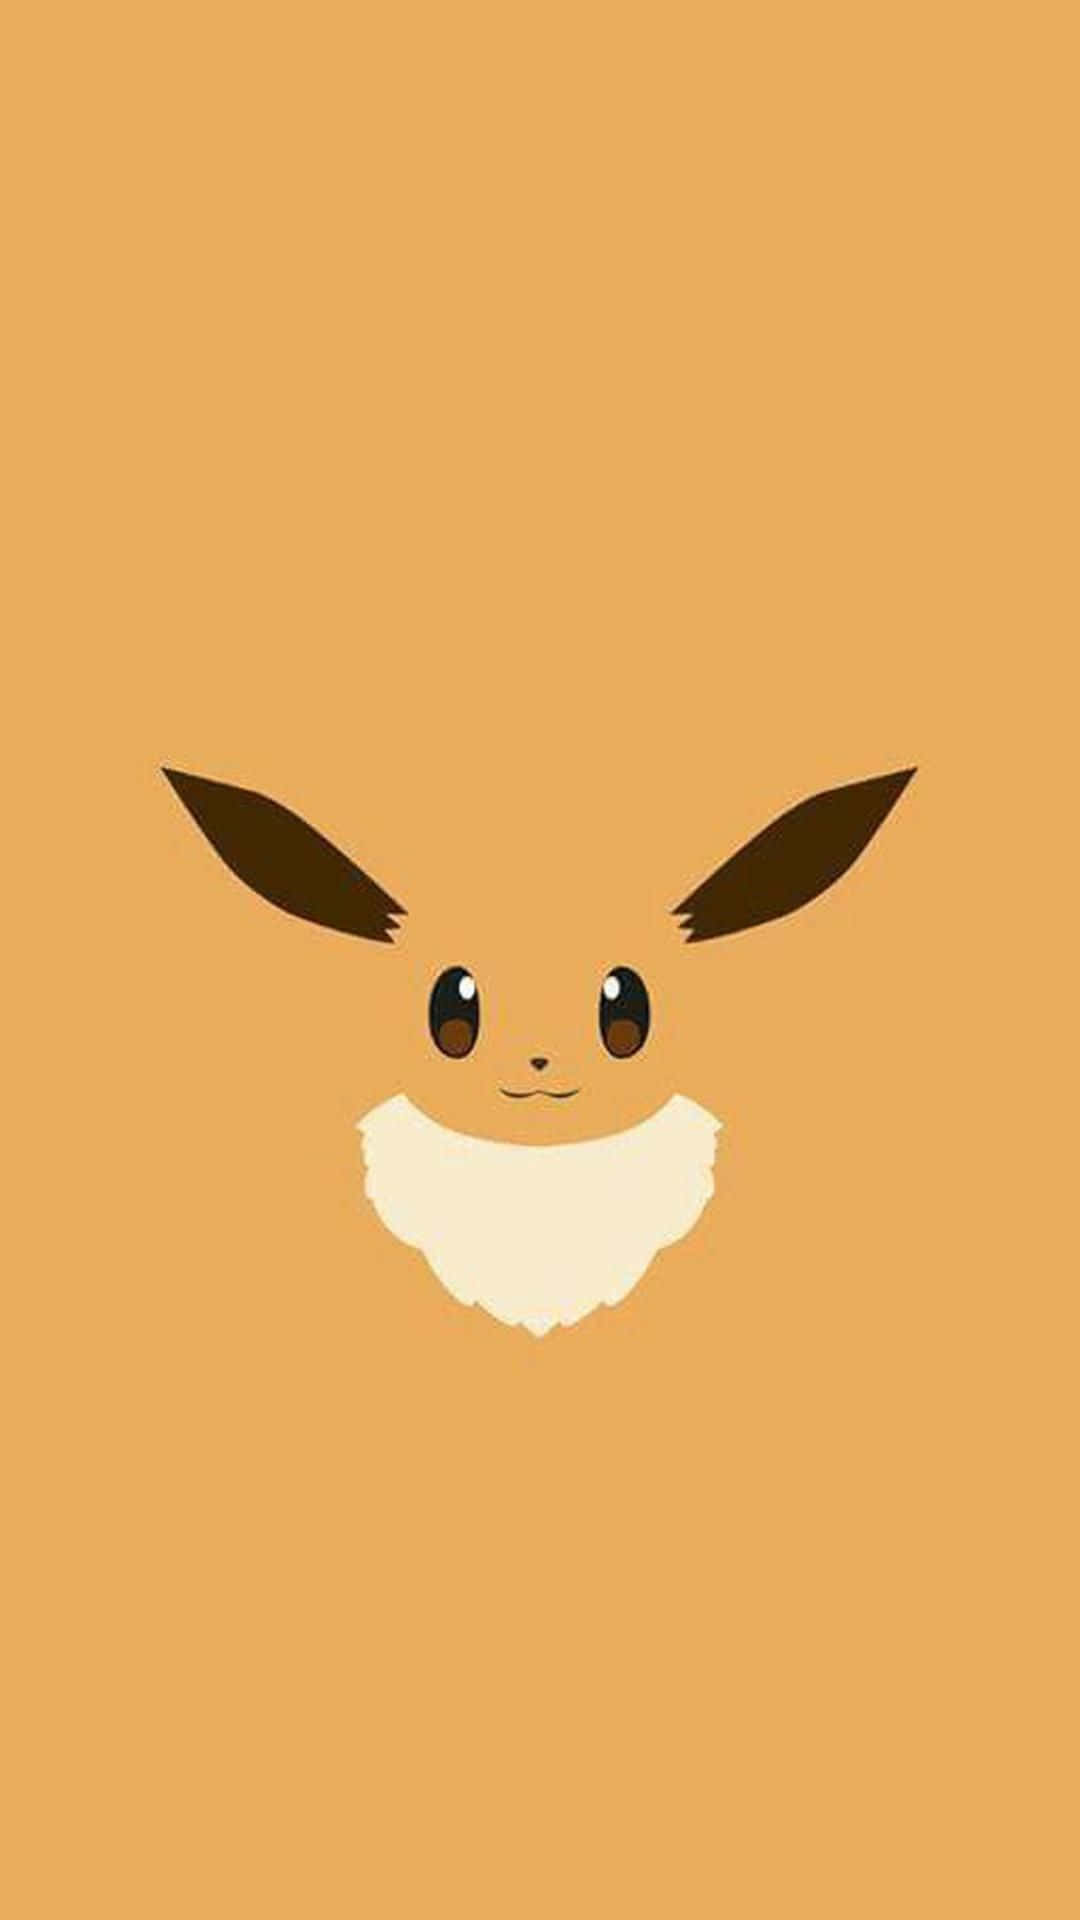 Adorable Eevee Looking Up Pleading for Attention Wallpaper